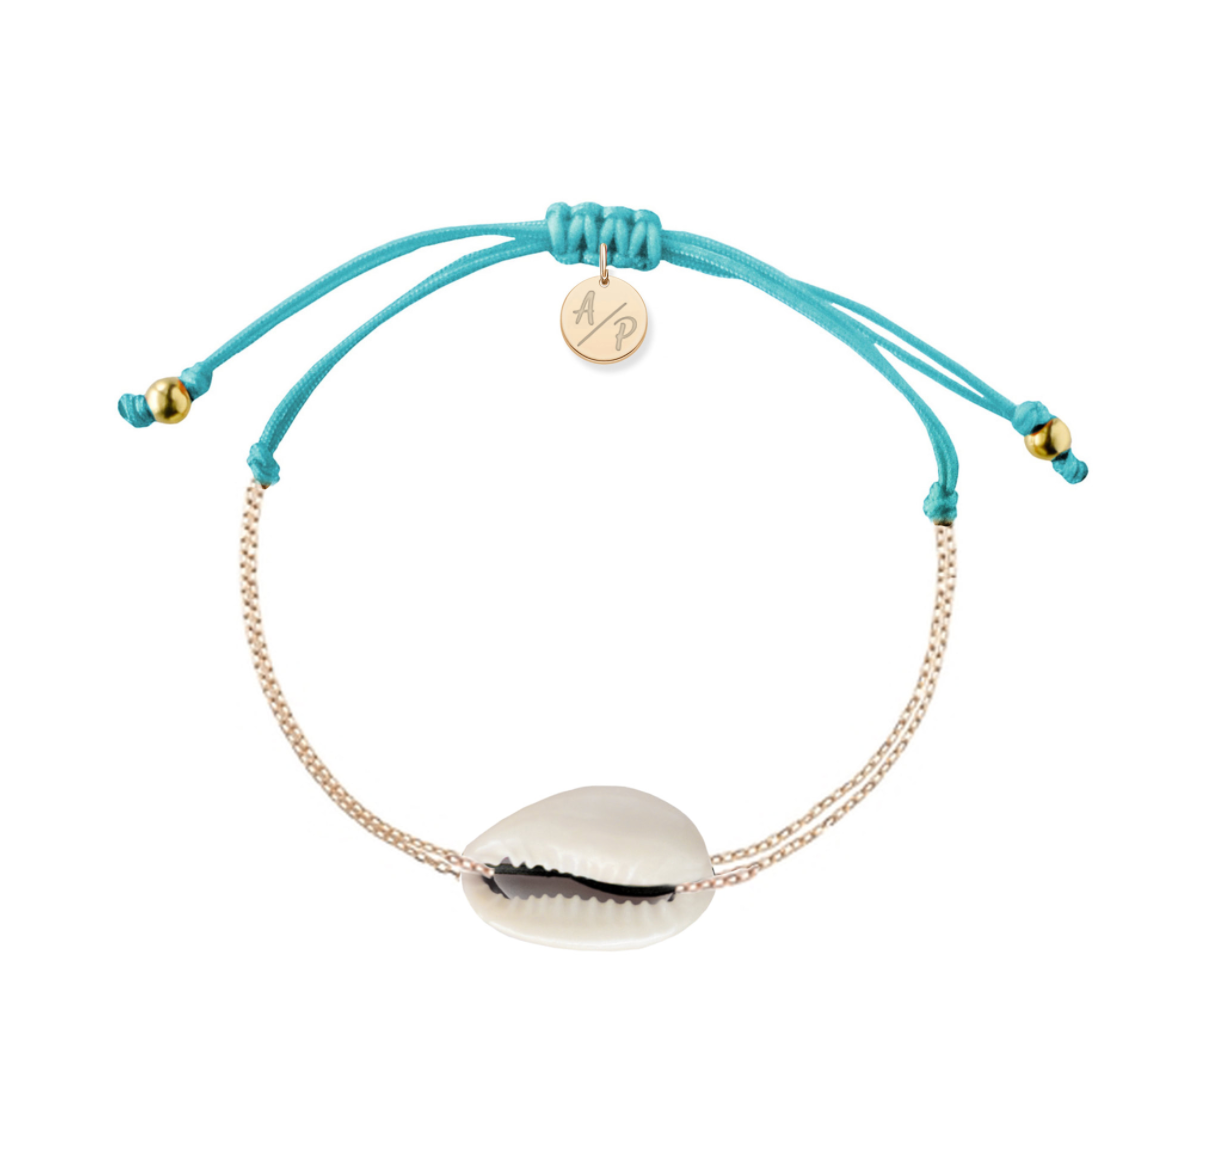 Mini Natural Shell Chain Bracelet - 14k Gold Filled on Colored Cord